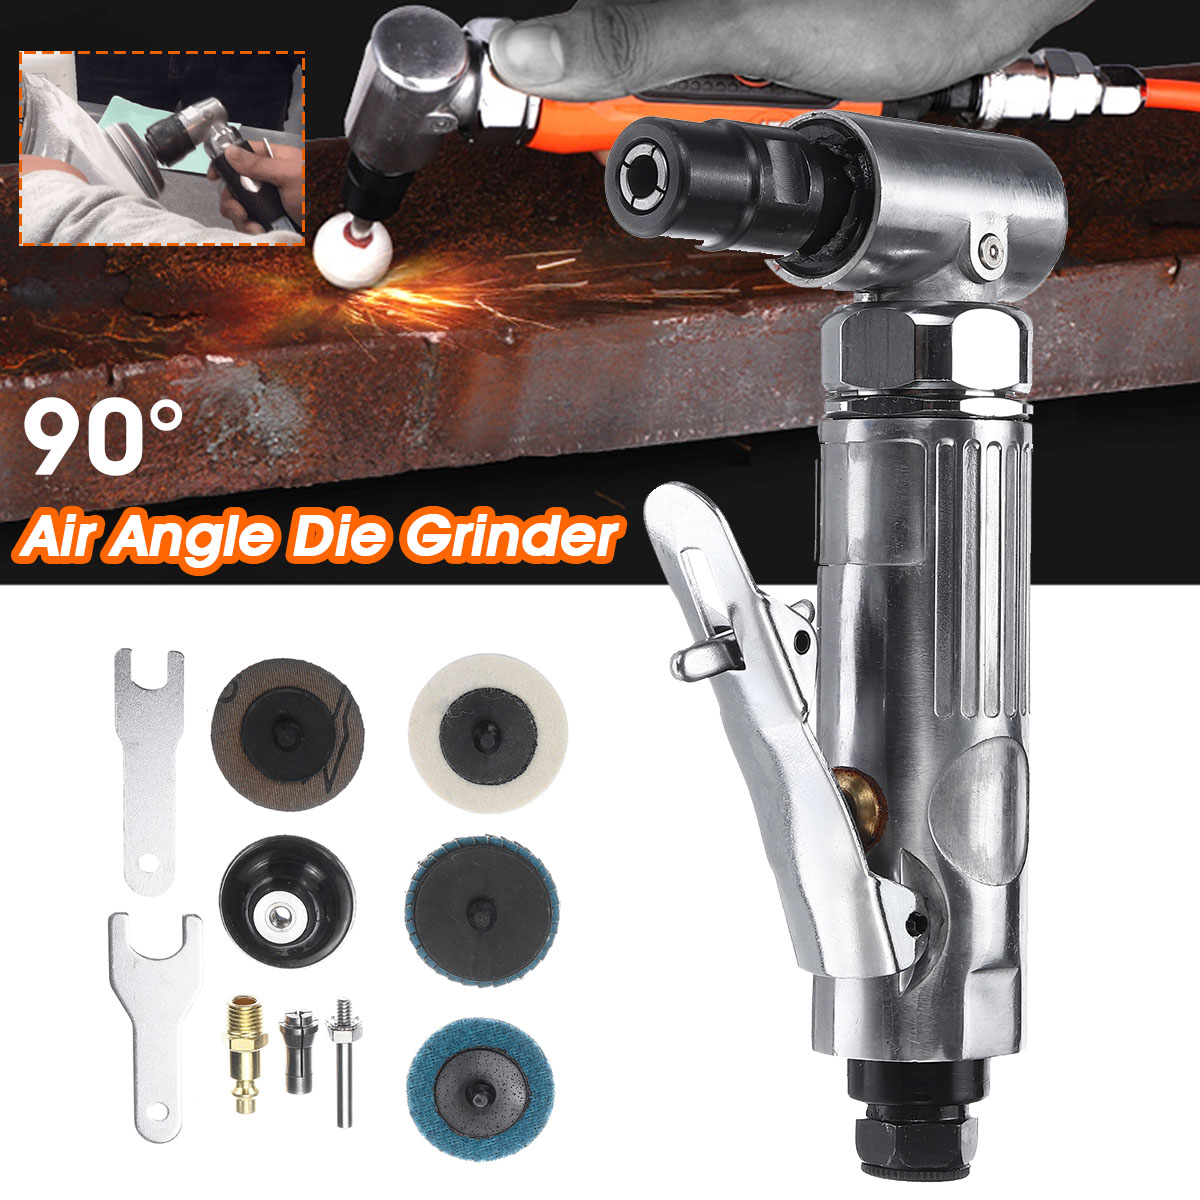 14-Inch-Air-Angle-Die-Grinder-90-Degree-Pneumatic-Grinding-Machine-Mini-Tool-Cutter-1645724-1